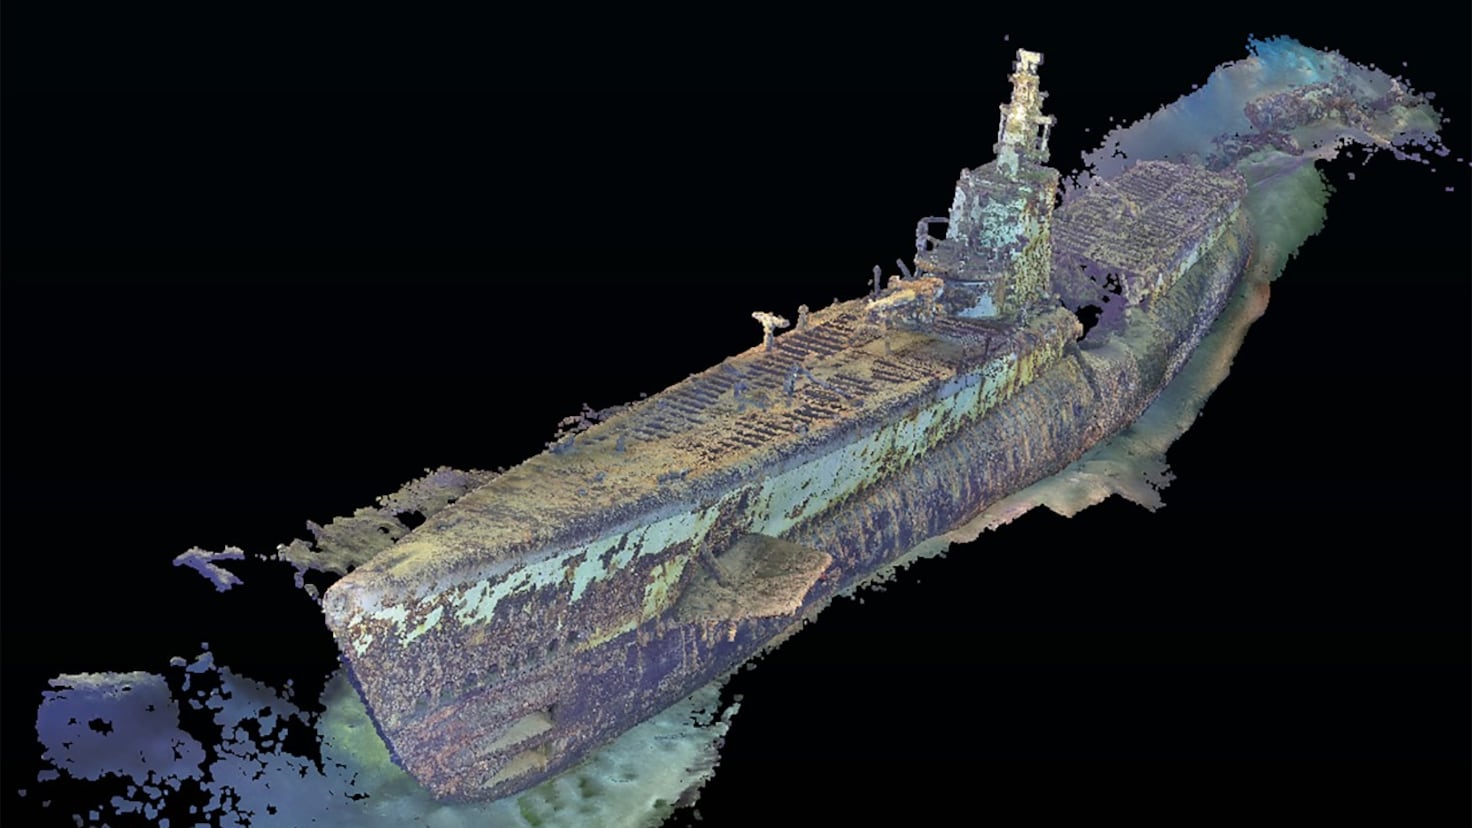 Discovery of the remains of a historic submarine
